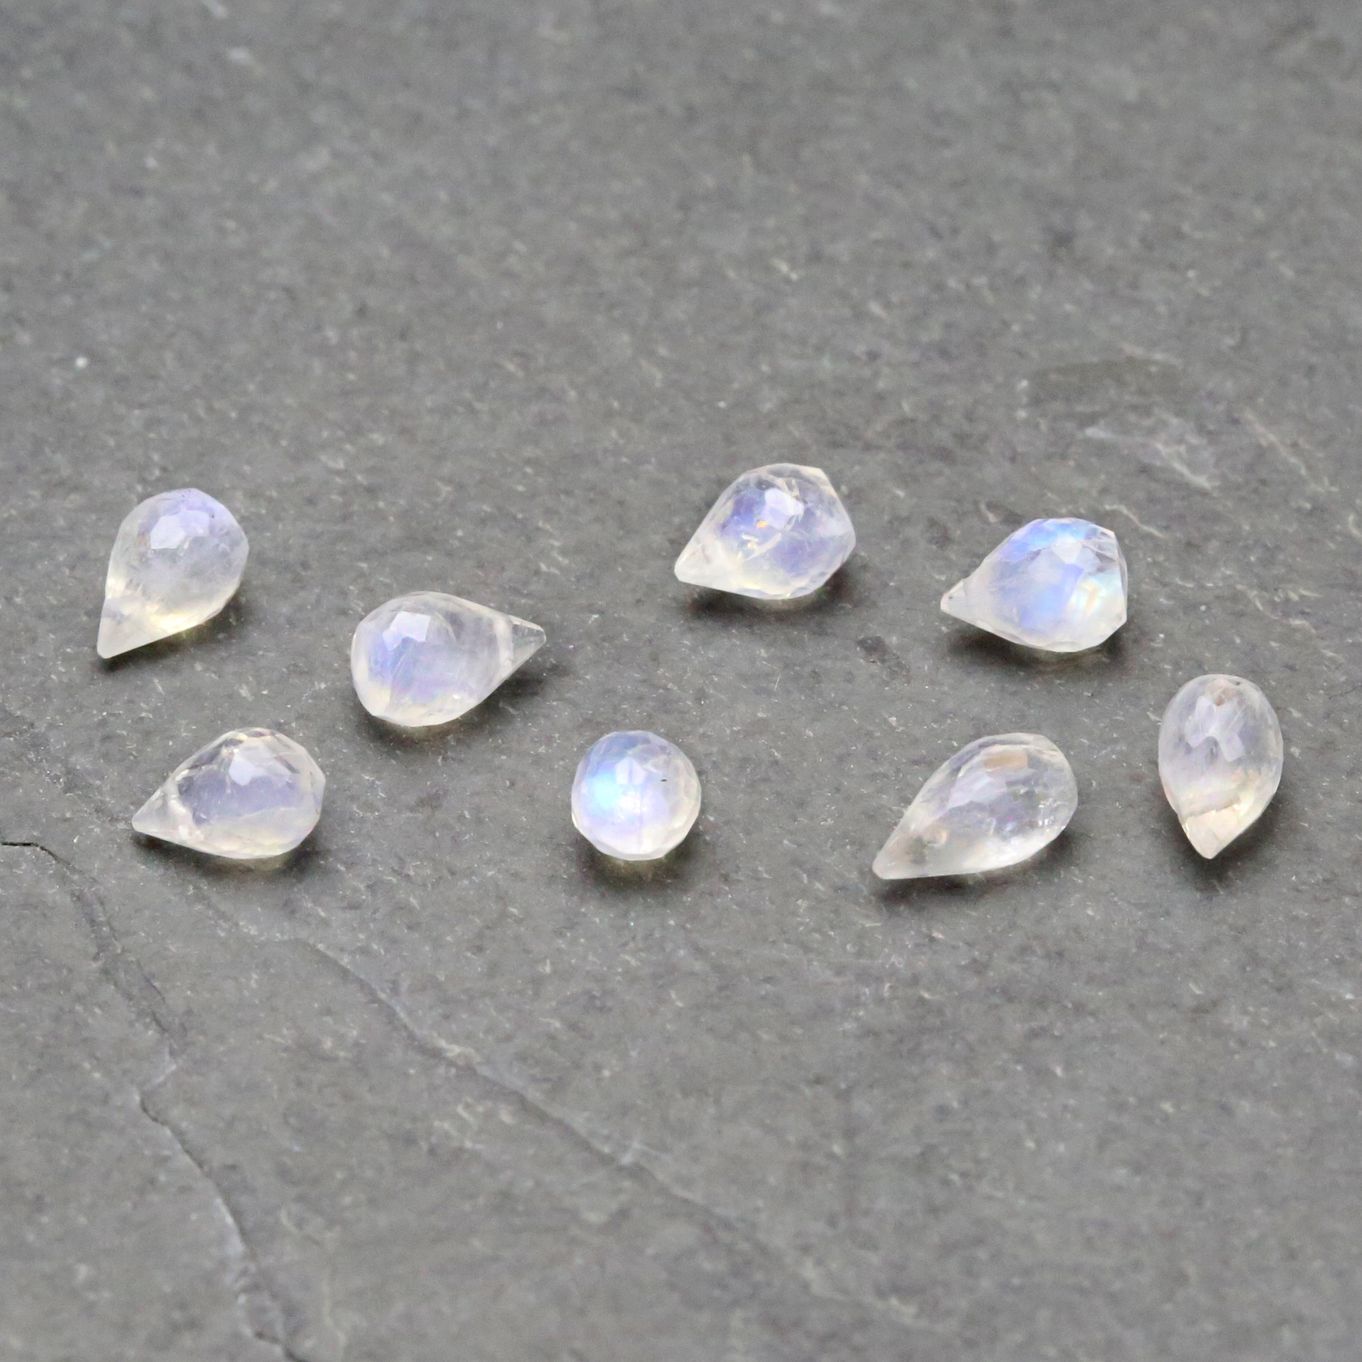 Rainbow Moonstone Faceted Drop Briolette Beads, Approx From 5x3mm To 7x5mm, Pack Of 10 Beads